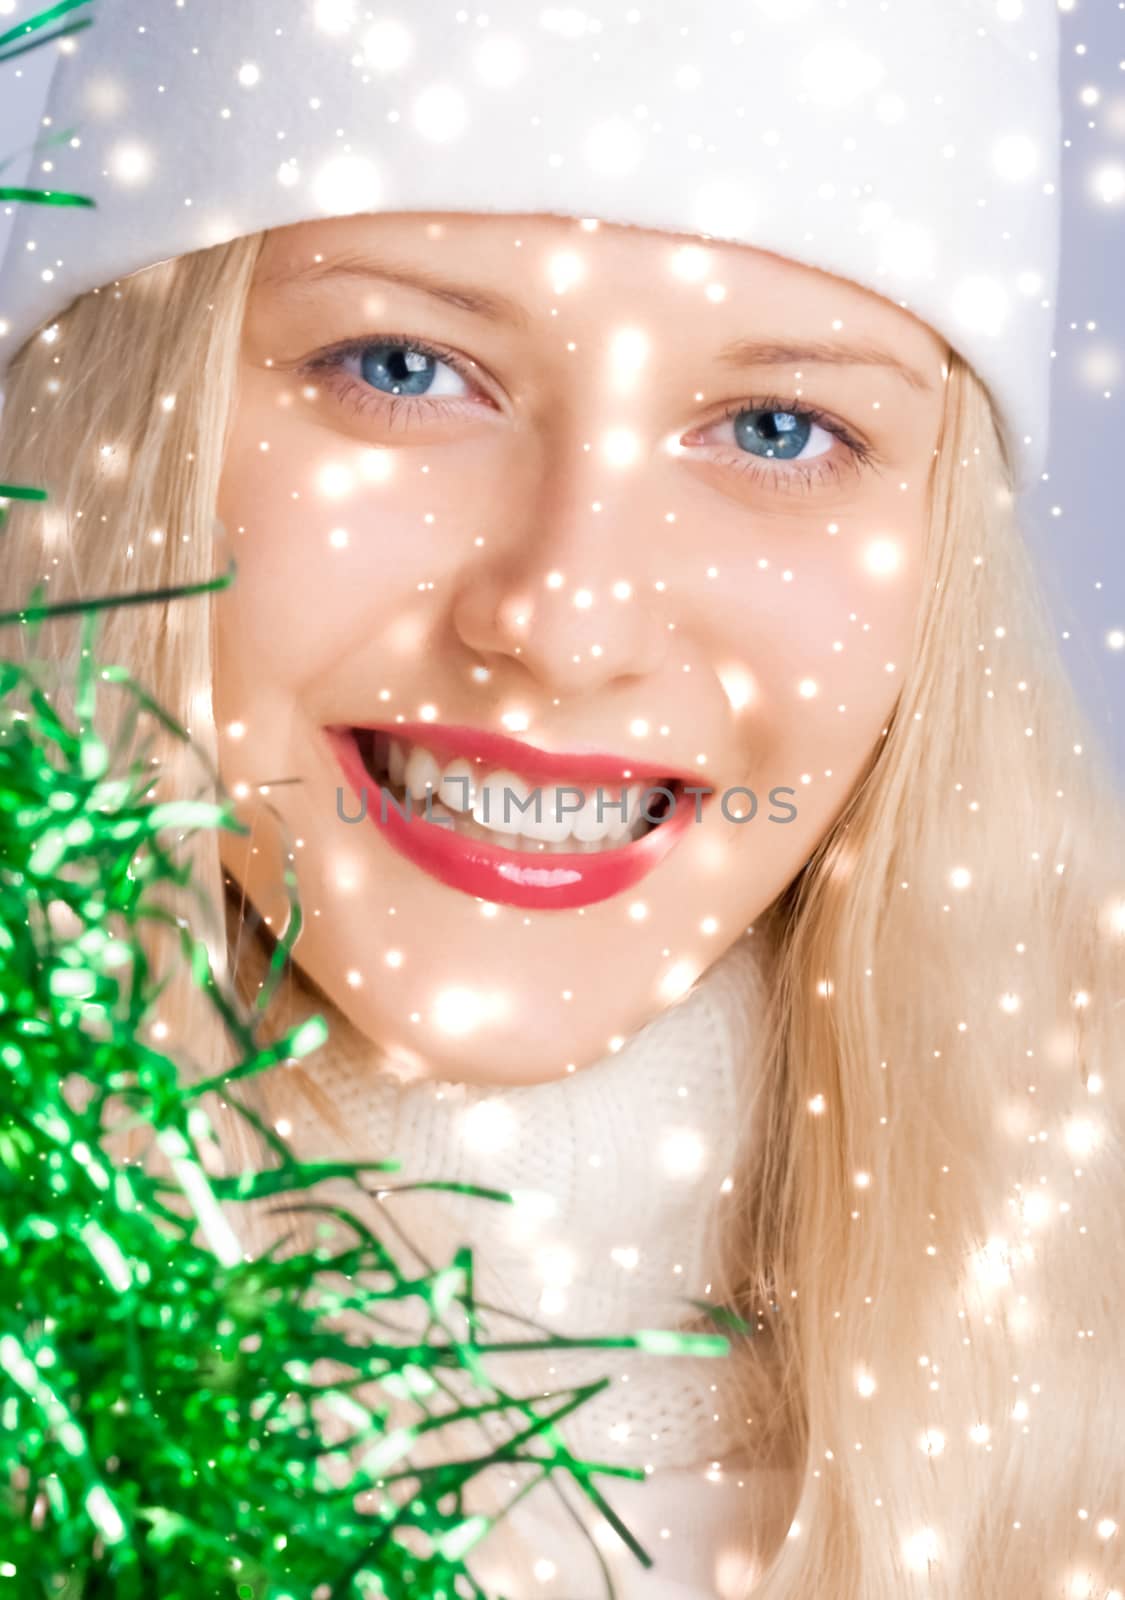 Shiny Christmas and glitter snow background, blonde woman with p by Anneleven